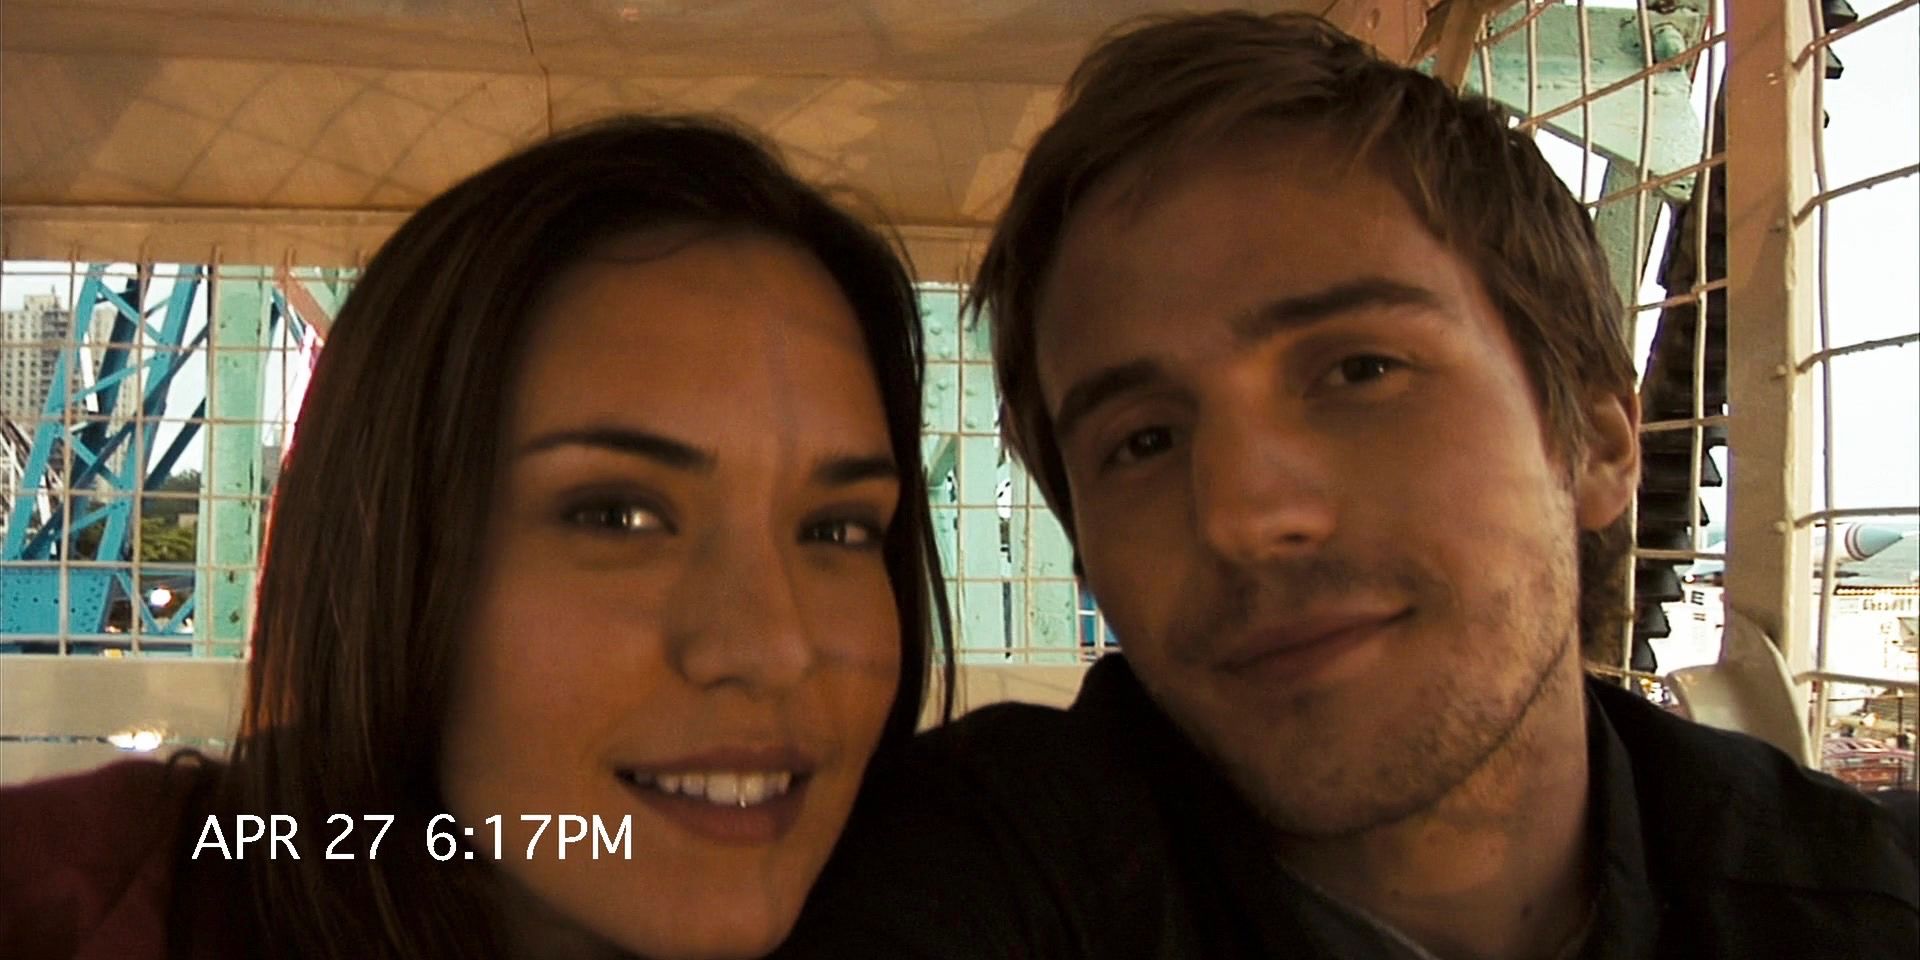 Michael Stahl-David and Odette Annable as Rob Hawkins and Beth McIntyre in Cloverfield